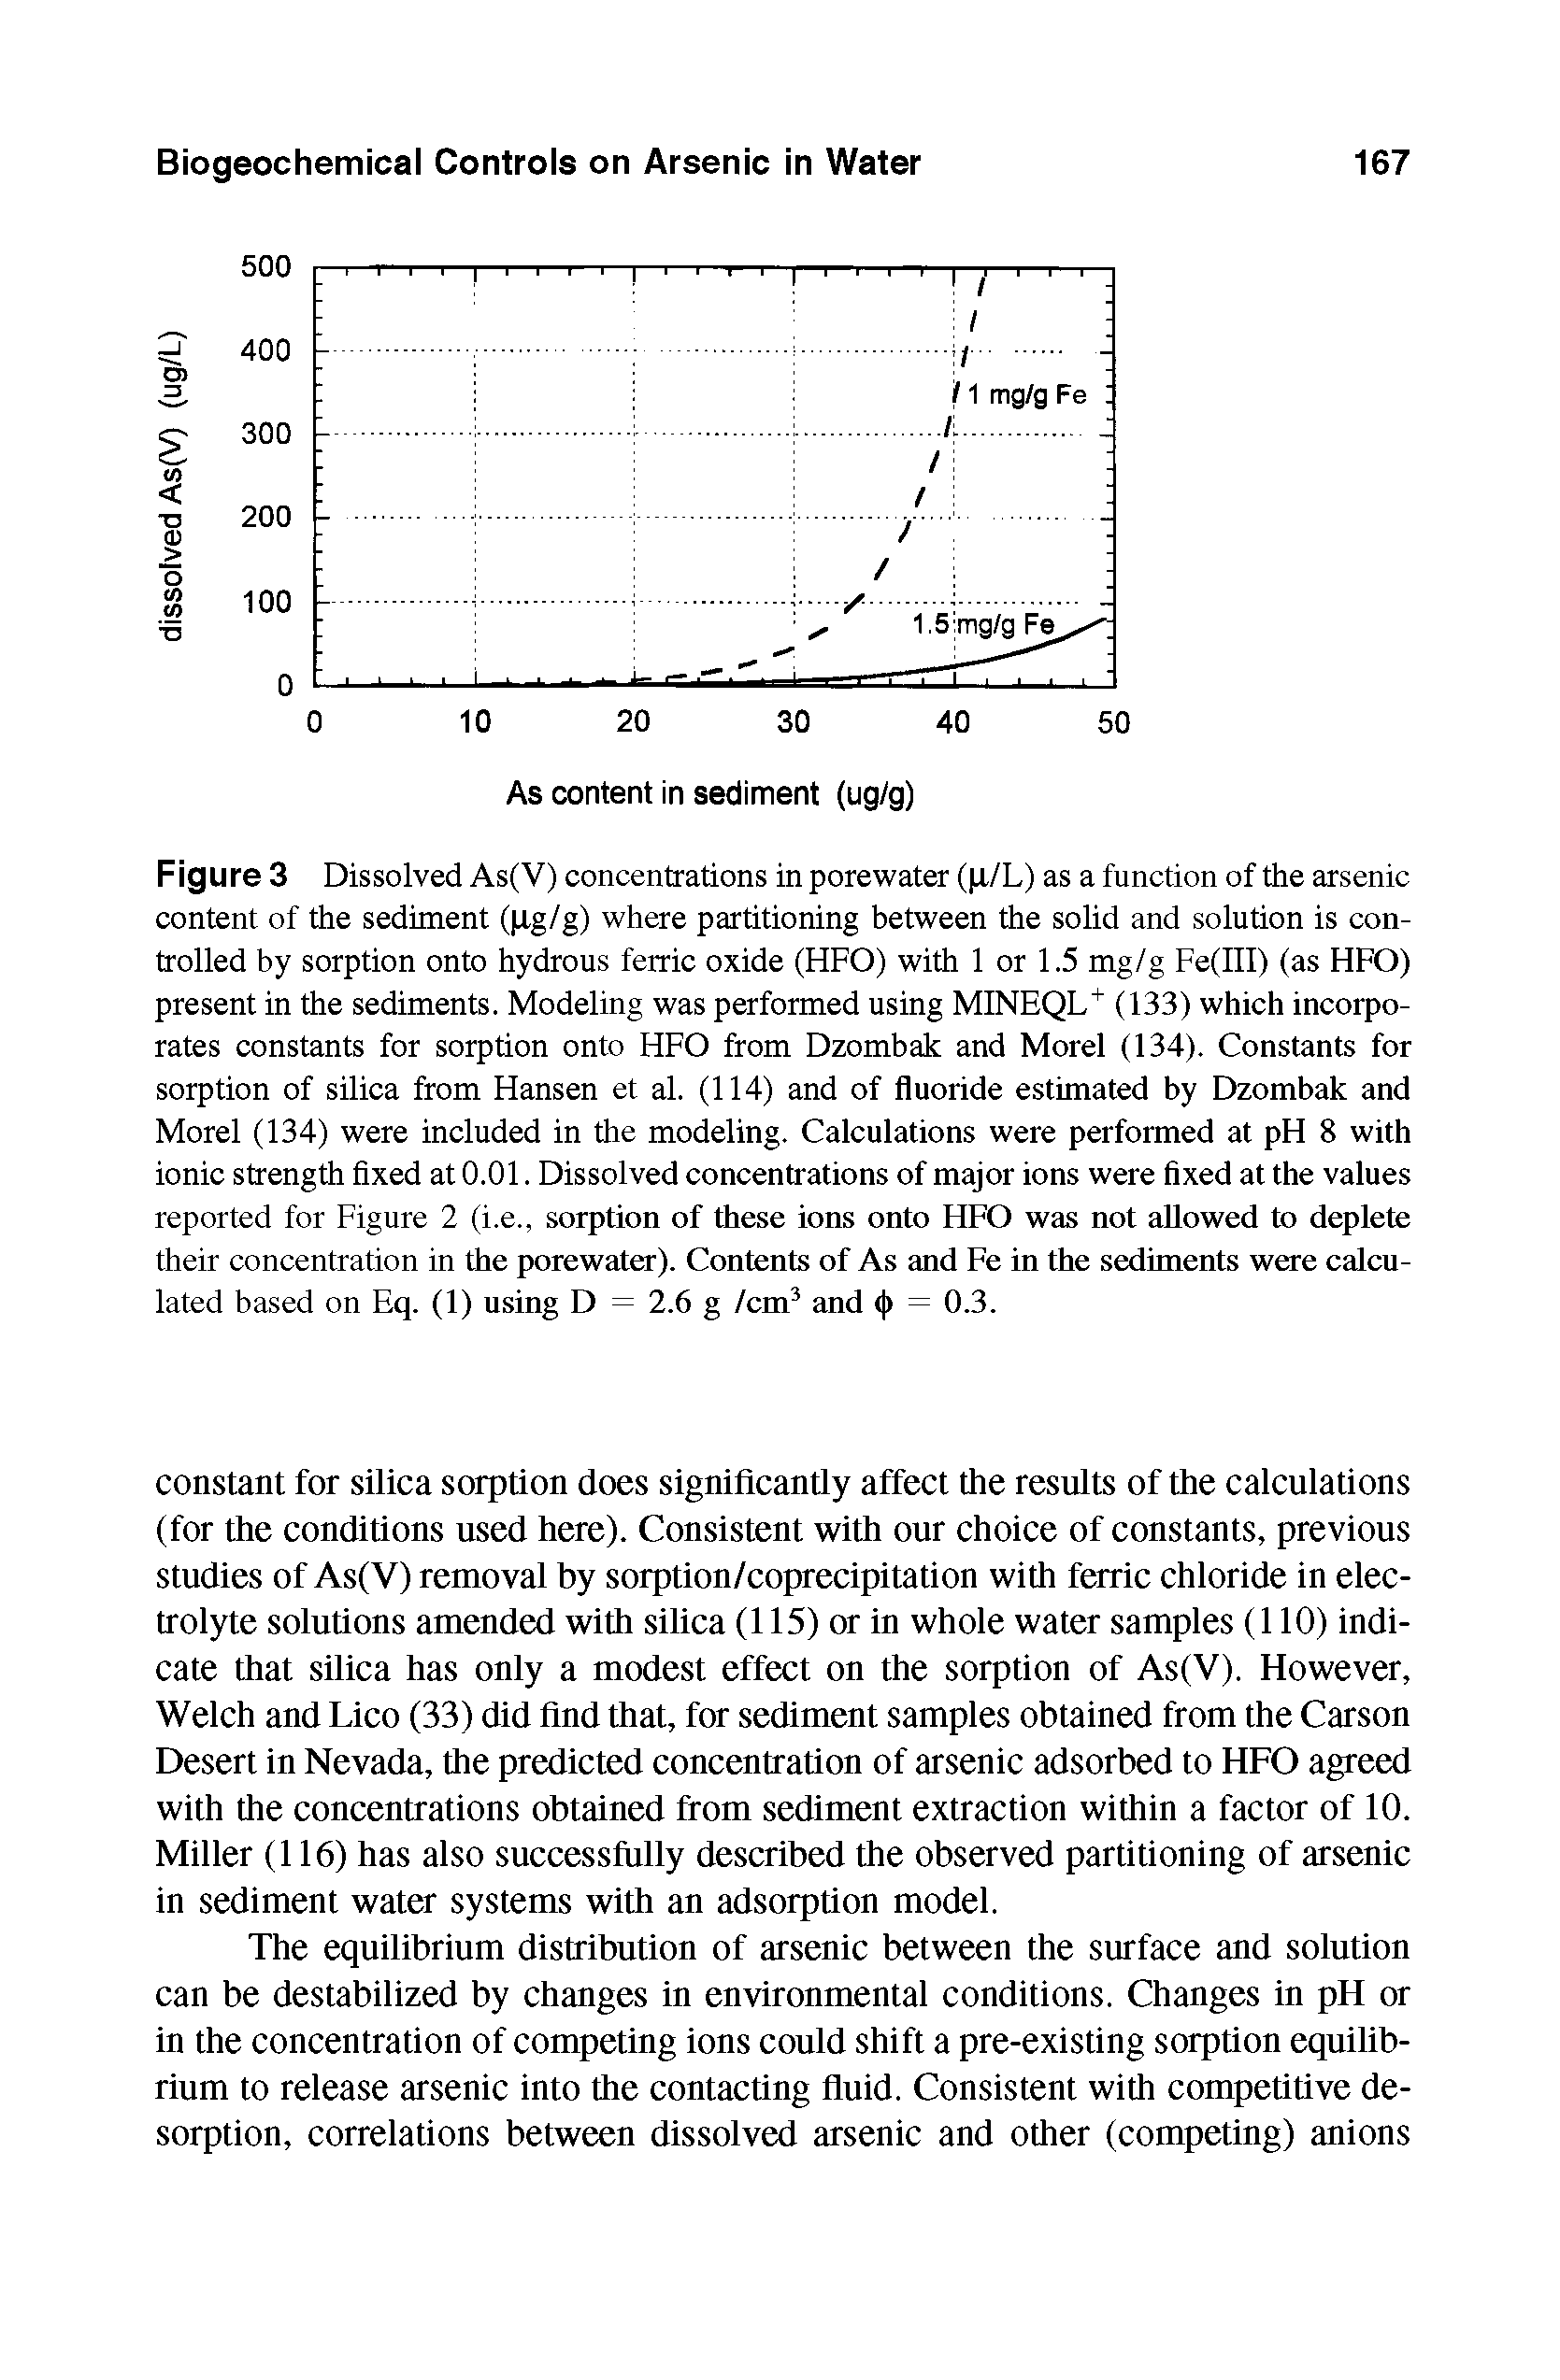 Figure 3 Dissolved As(V) concentrations in porewater ( X/L) as a function of the arsenic content of the sediment ( Xg/g) where partitioning between the solid and solution is controlled by sorption onto hydrous ferric oxide (HFO) with 1 or 1.5 mg/g Fe(III) (as HFO) present in the sediments. Modeling was performed using MINEQL (133) which incorporates constants for sorption onto HFO from Dzombak and Morel (134). Constants for sorption of silica from Hansen et al. (114) and of fluoride estimated by Dzombak and Morel (134) were included in the modeling. Calculations were performed at pH 8 with ionic strength fixed at 0.01. Dissolved concentrations of major ions were fixed at the values reported for Figure 2 (i.e., sorption of these ions onto HFO was not allowed to deplete their concentration in the porewater). Contents of As and Fe in the sediments were calculated based on Eq. (1) using D = 2.6 g Ian and ( ) = 0.3.